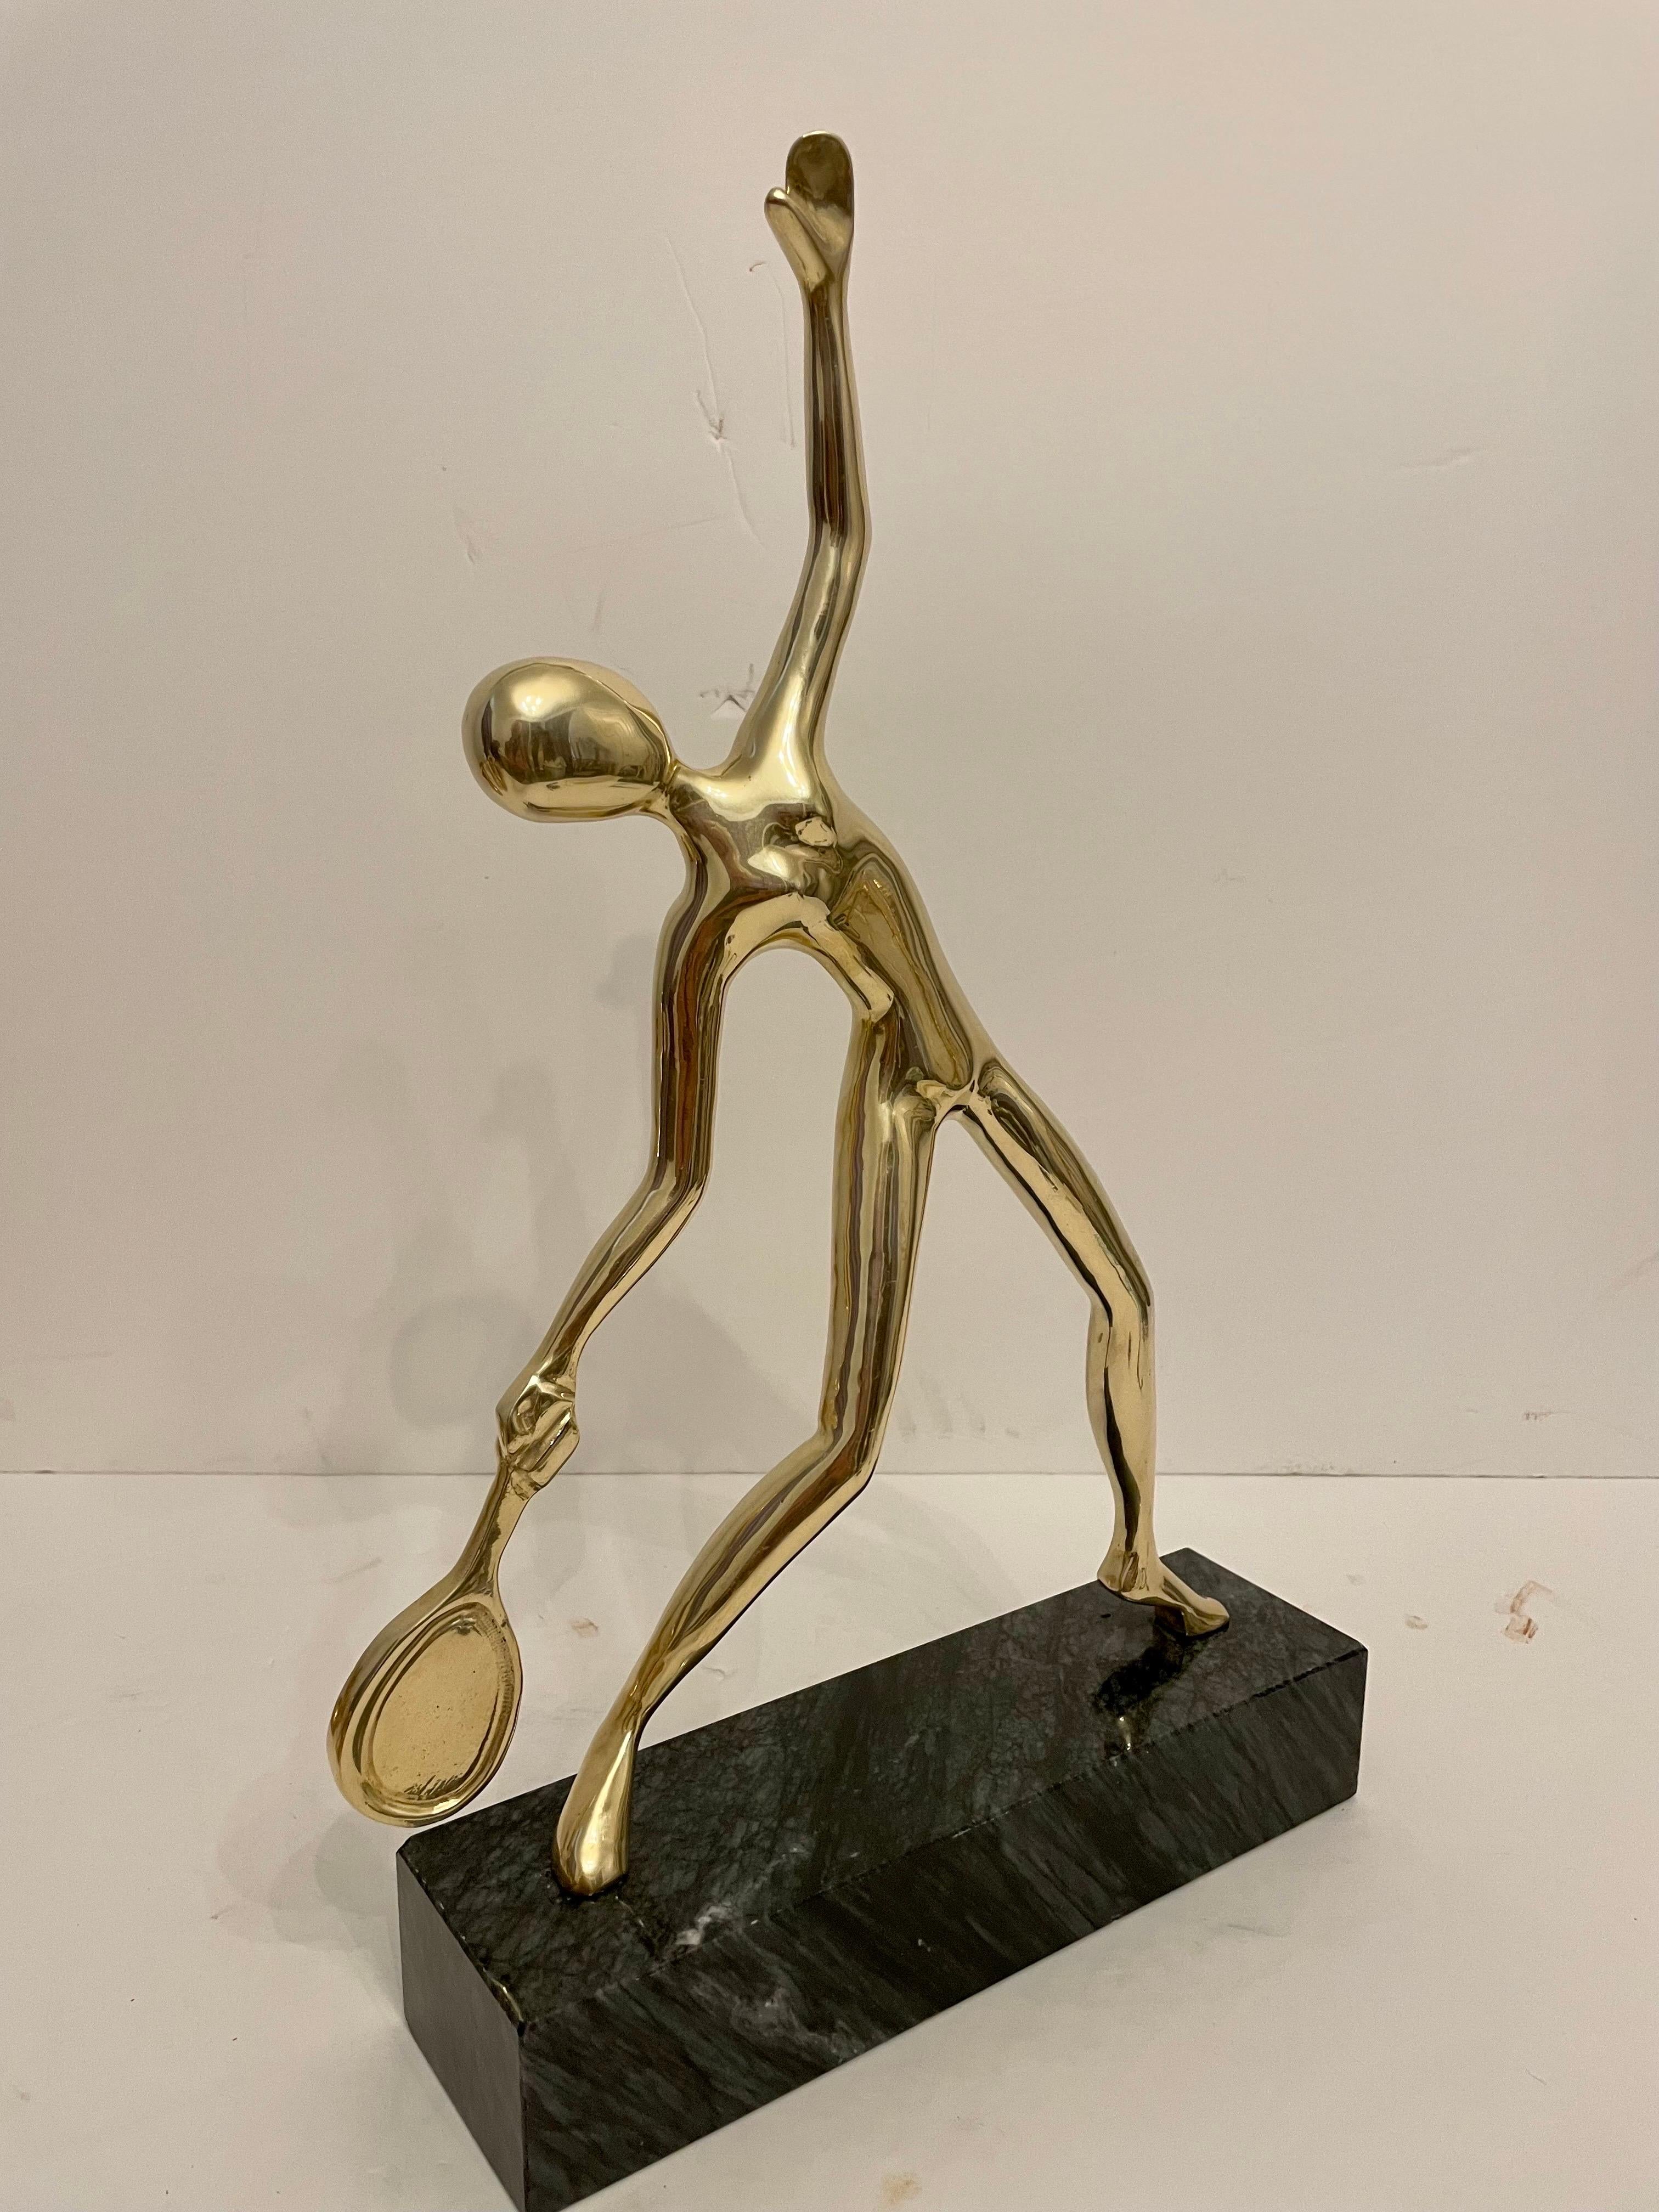 Very unique large heavy solid brass tennis sculpture or statue on grey and black marble base. Great abstract Mid Century form in very good condition. Measures 17